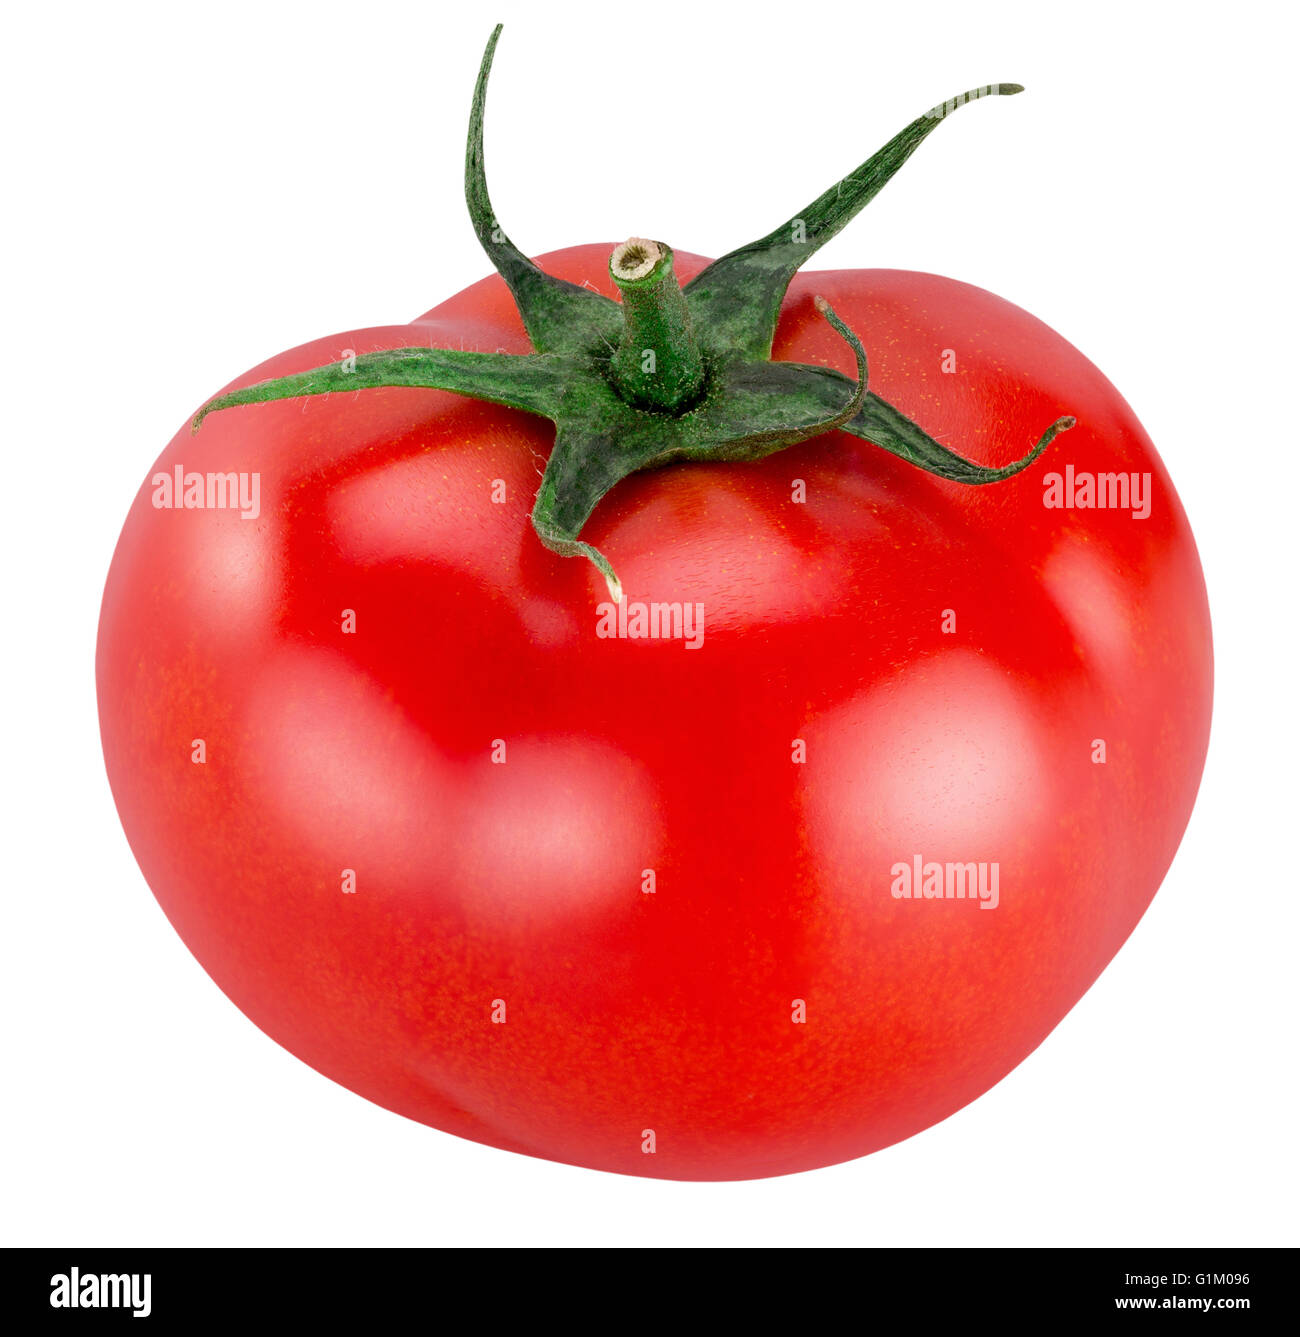 red tomato isolated on the white background. Stock Photo